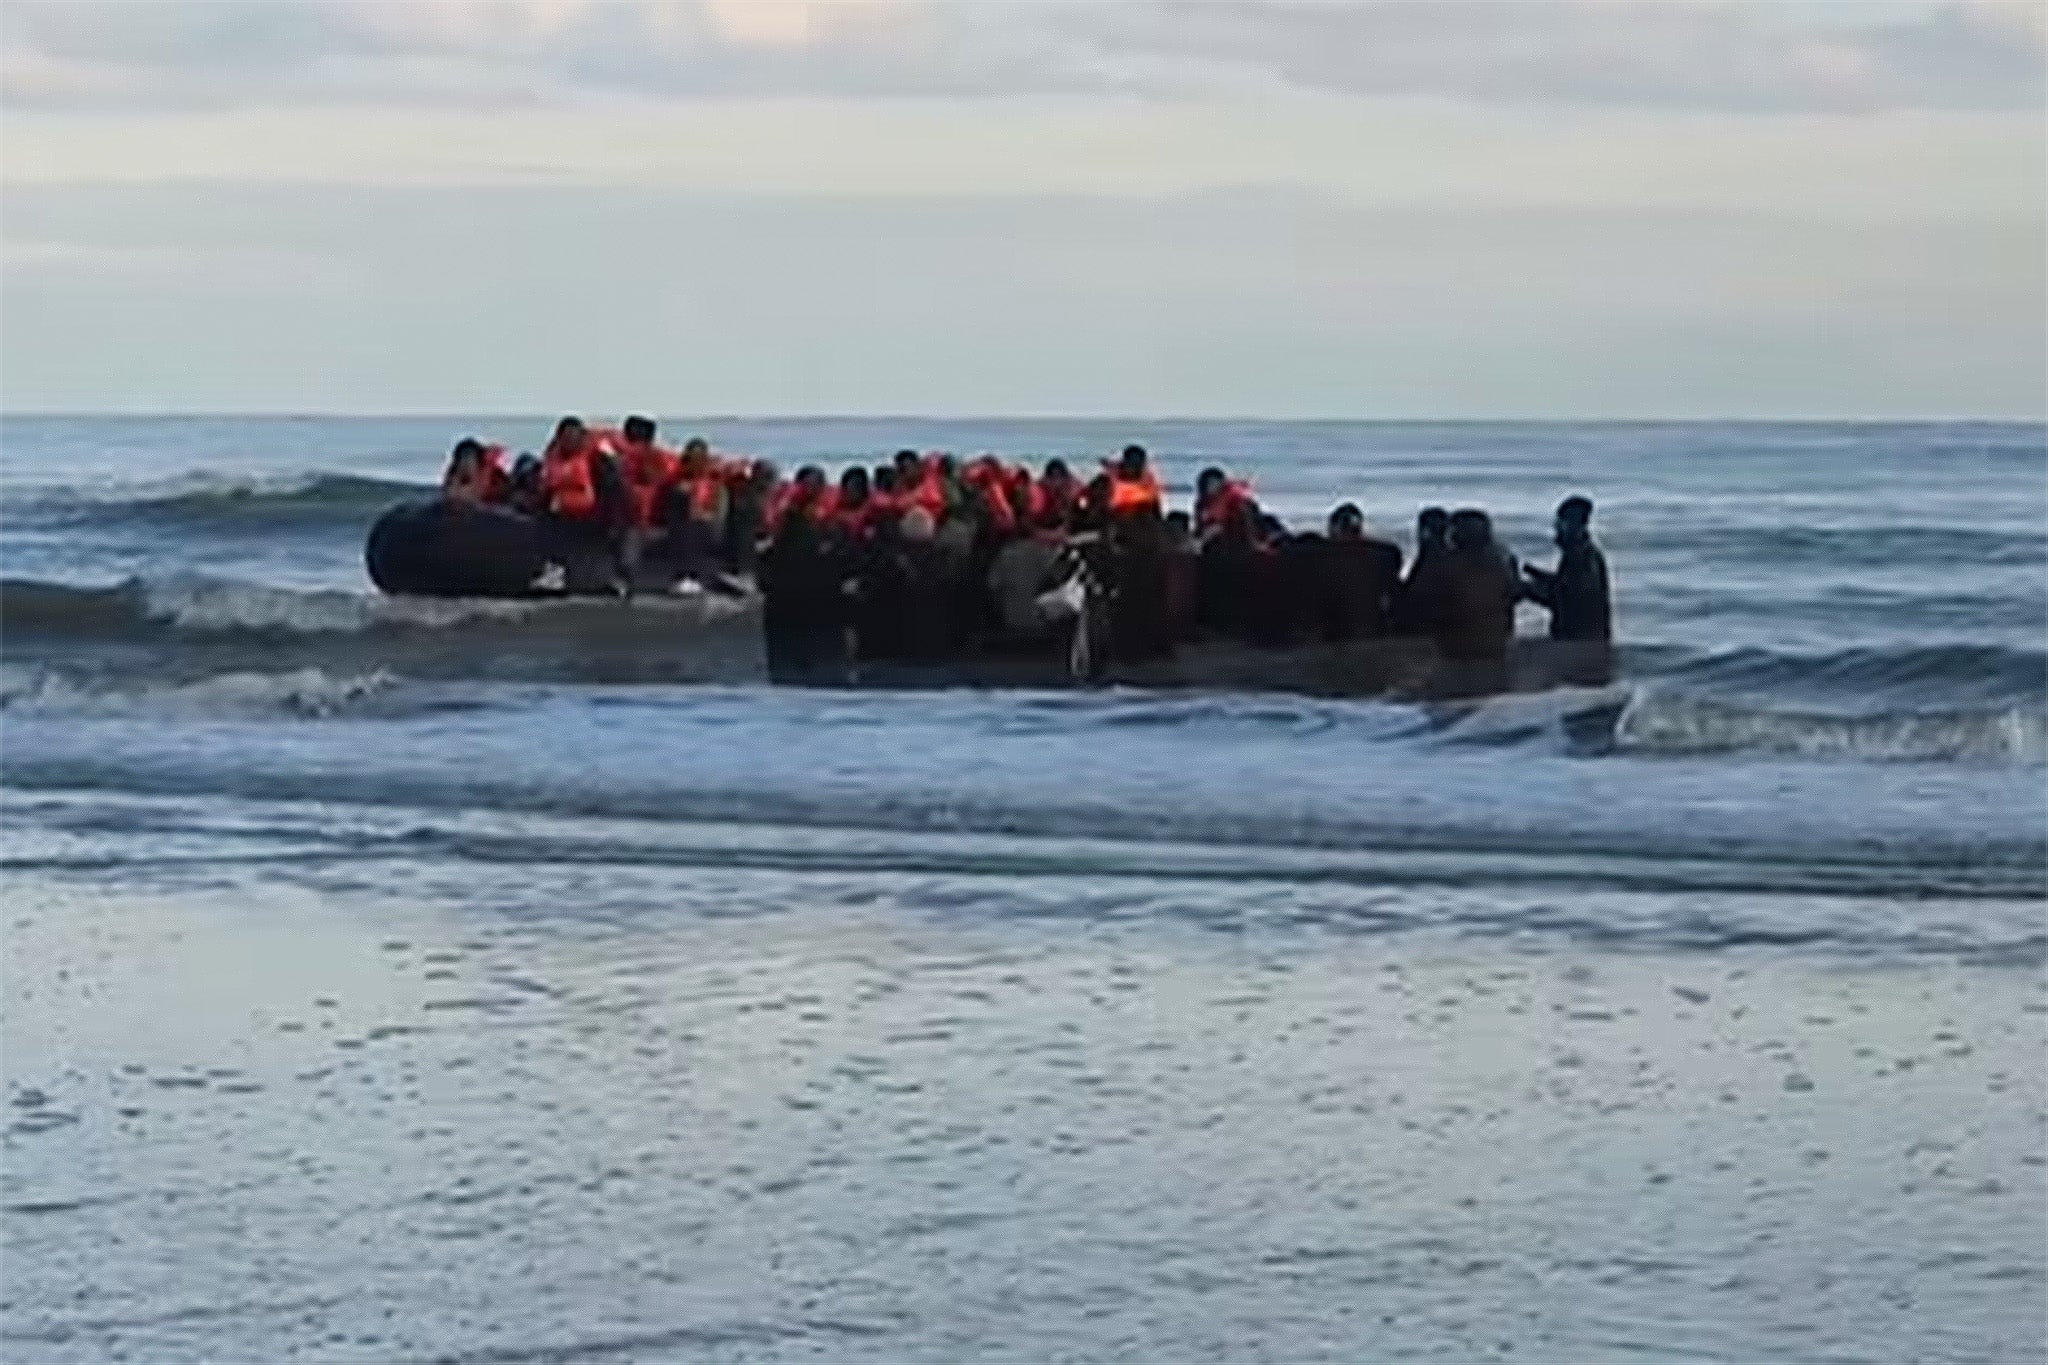 Footage from BBC News shows migrants in small boat at Dunkirk last Tuesday morning after French coast guard announced five people had died